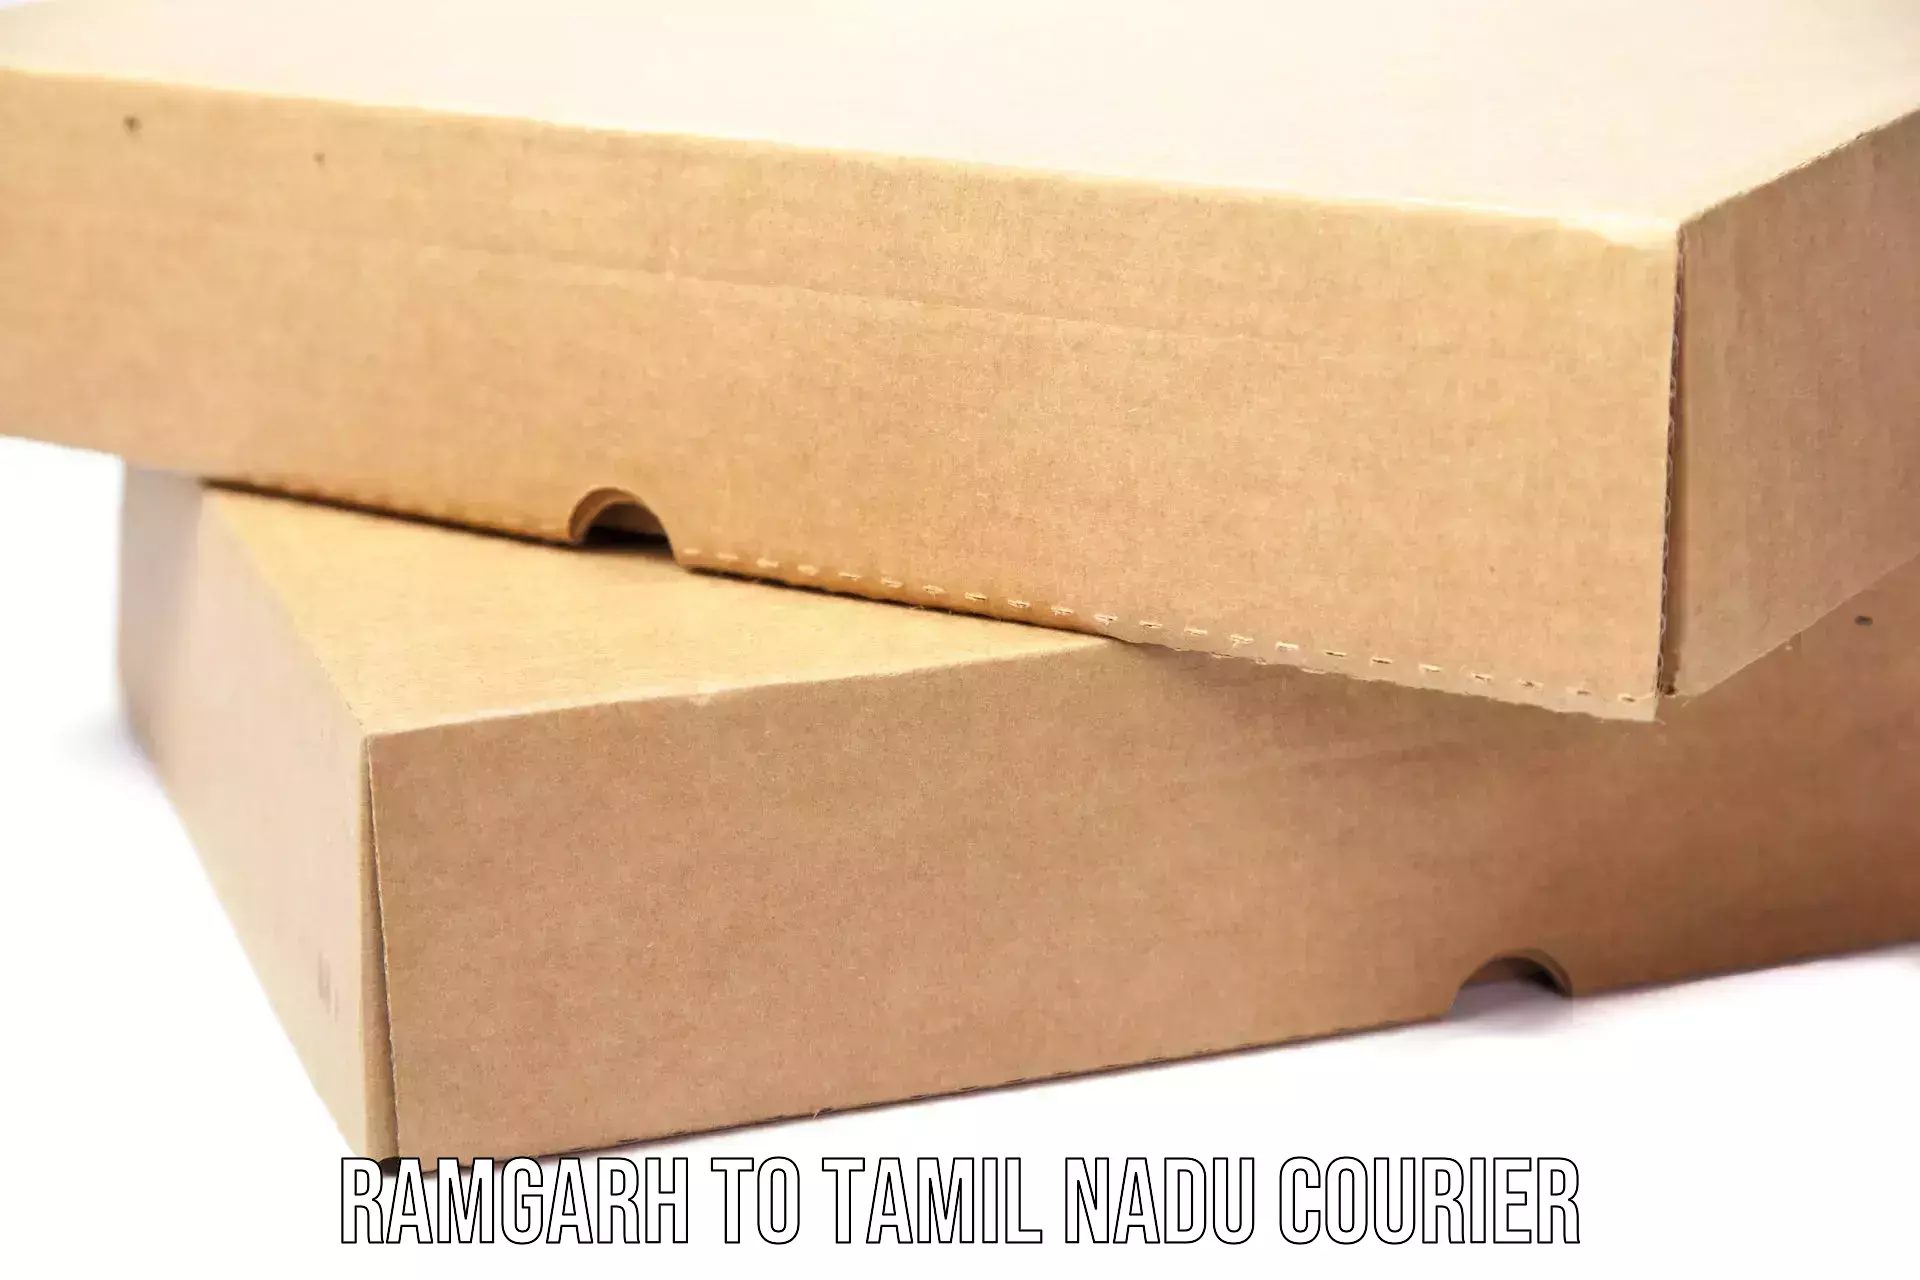 Multi-national courier services Ramgarh to Dindigul